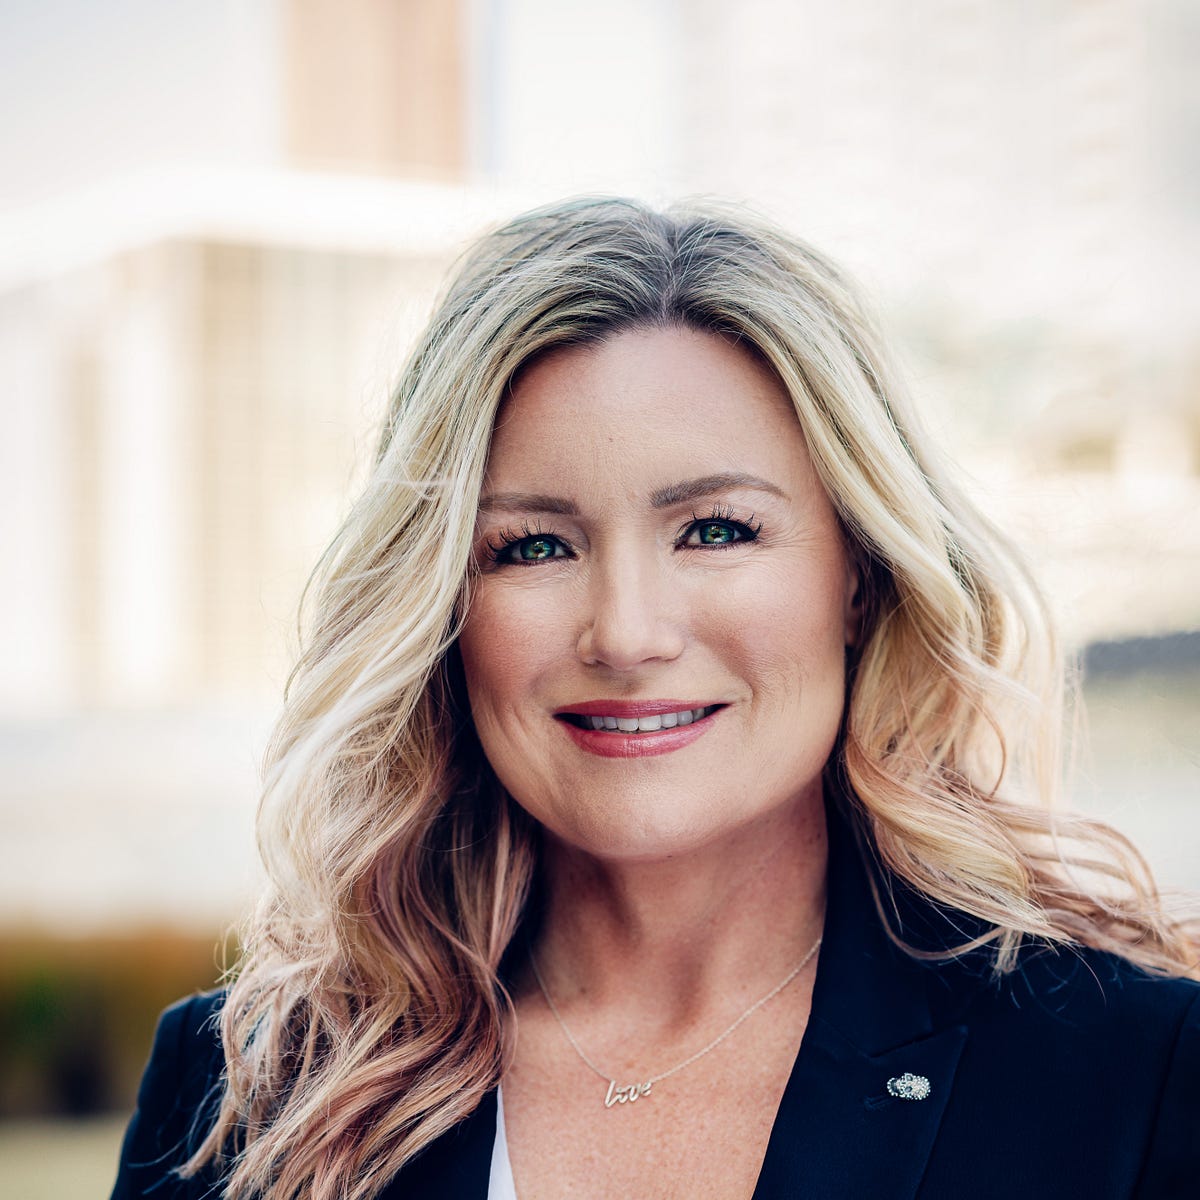 Inspirational Women Leaders Of Tech: Christy Brown of Dr. Noze Best On The  5 Steps Needed To Create Great Tech Products, by Hannah Clark, Editor of  The Product Manager, Authority Magazine